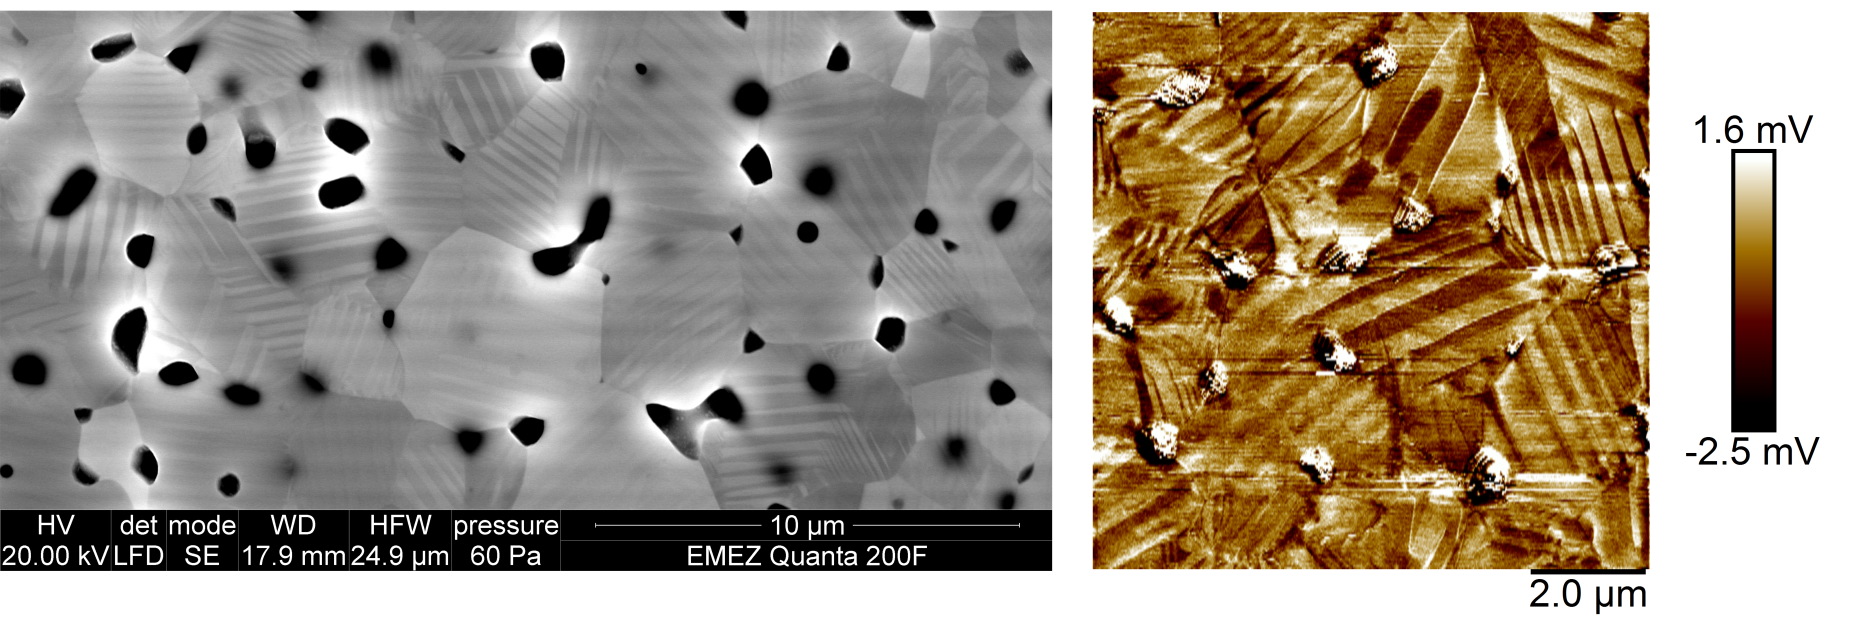 Enlarged view: Electron microscope image of a barium titanate sample